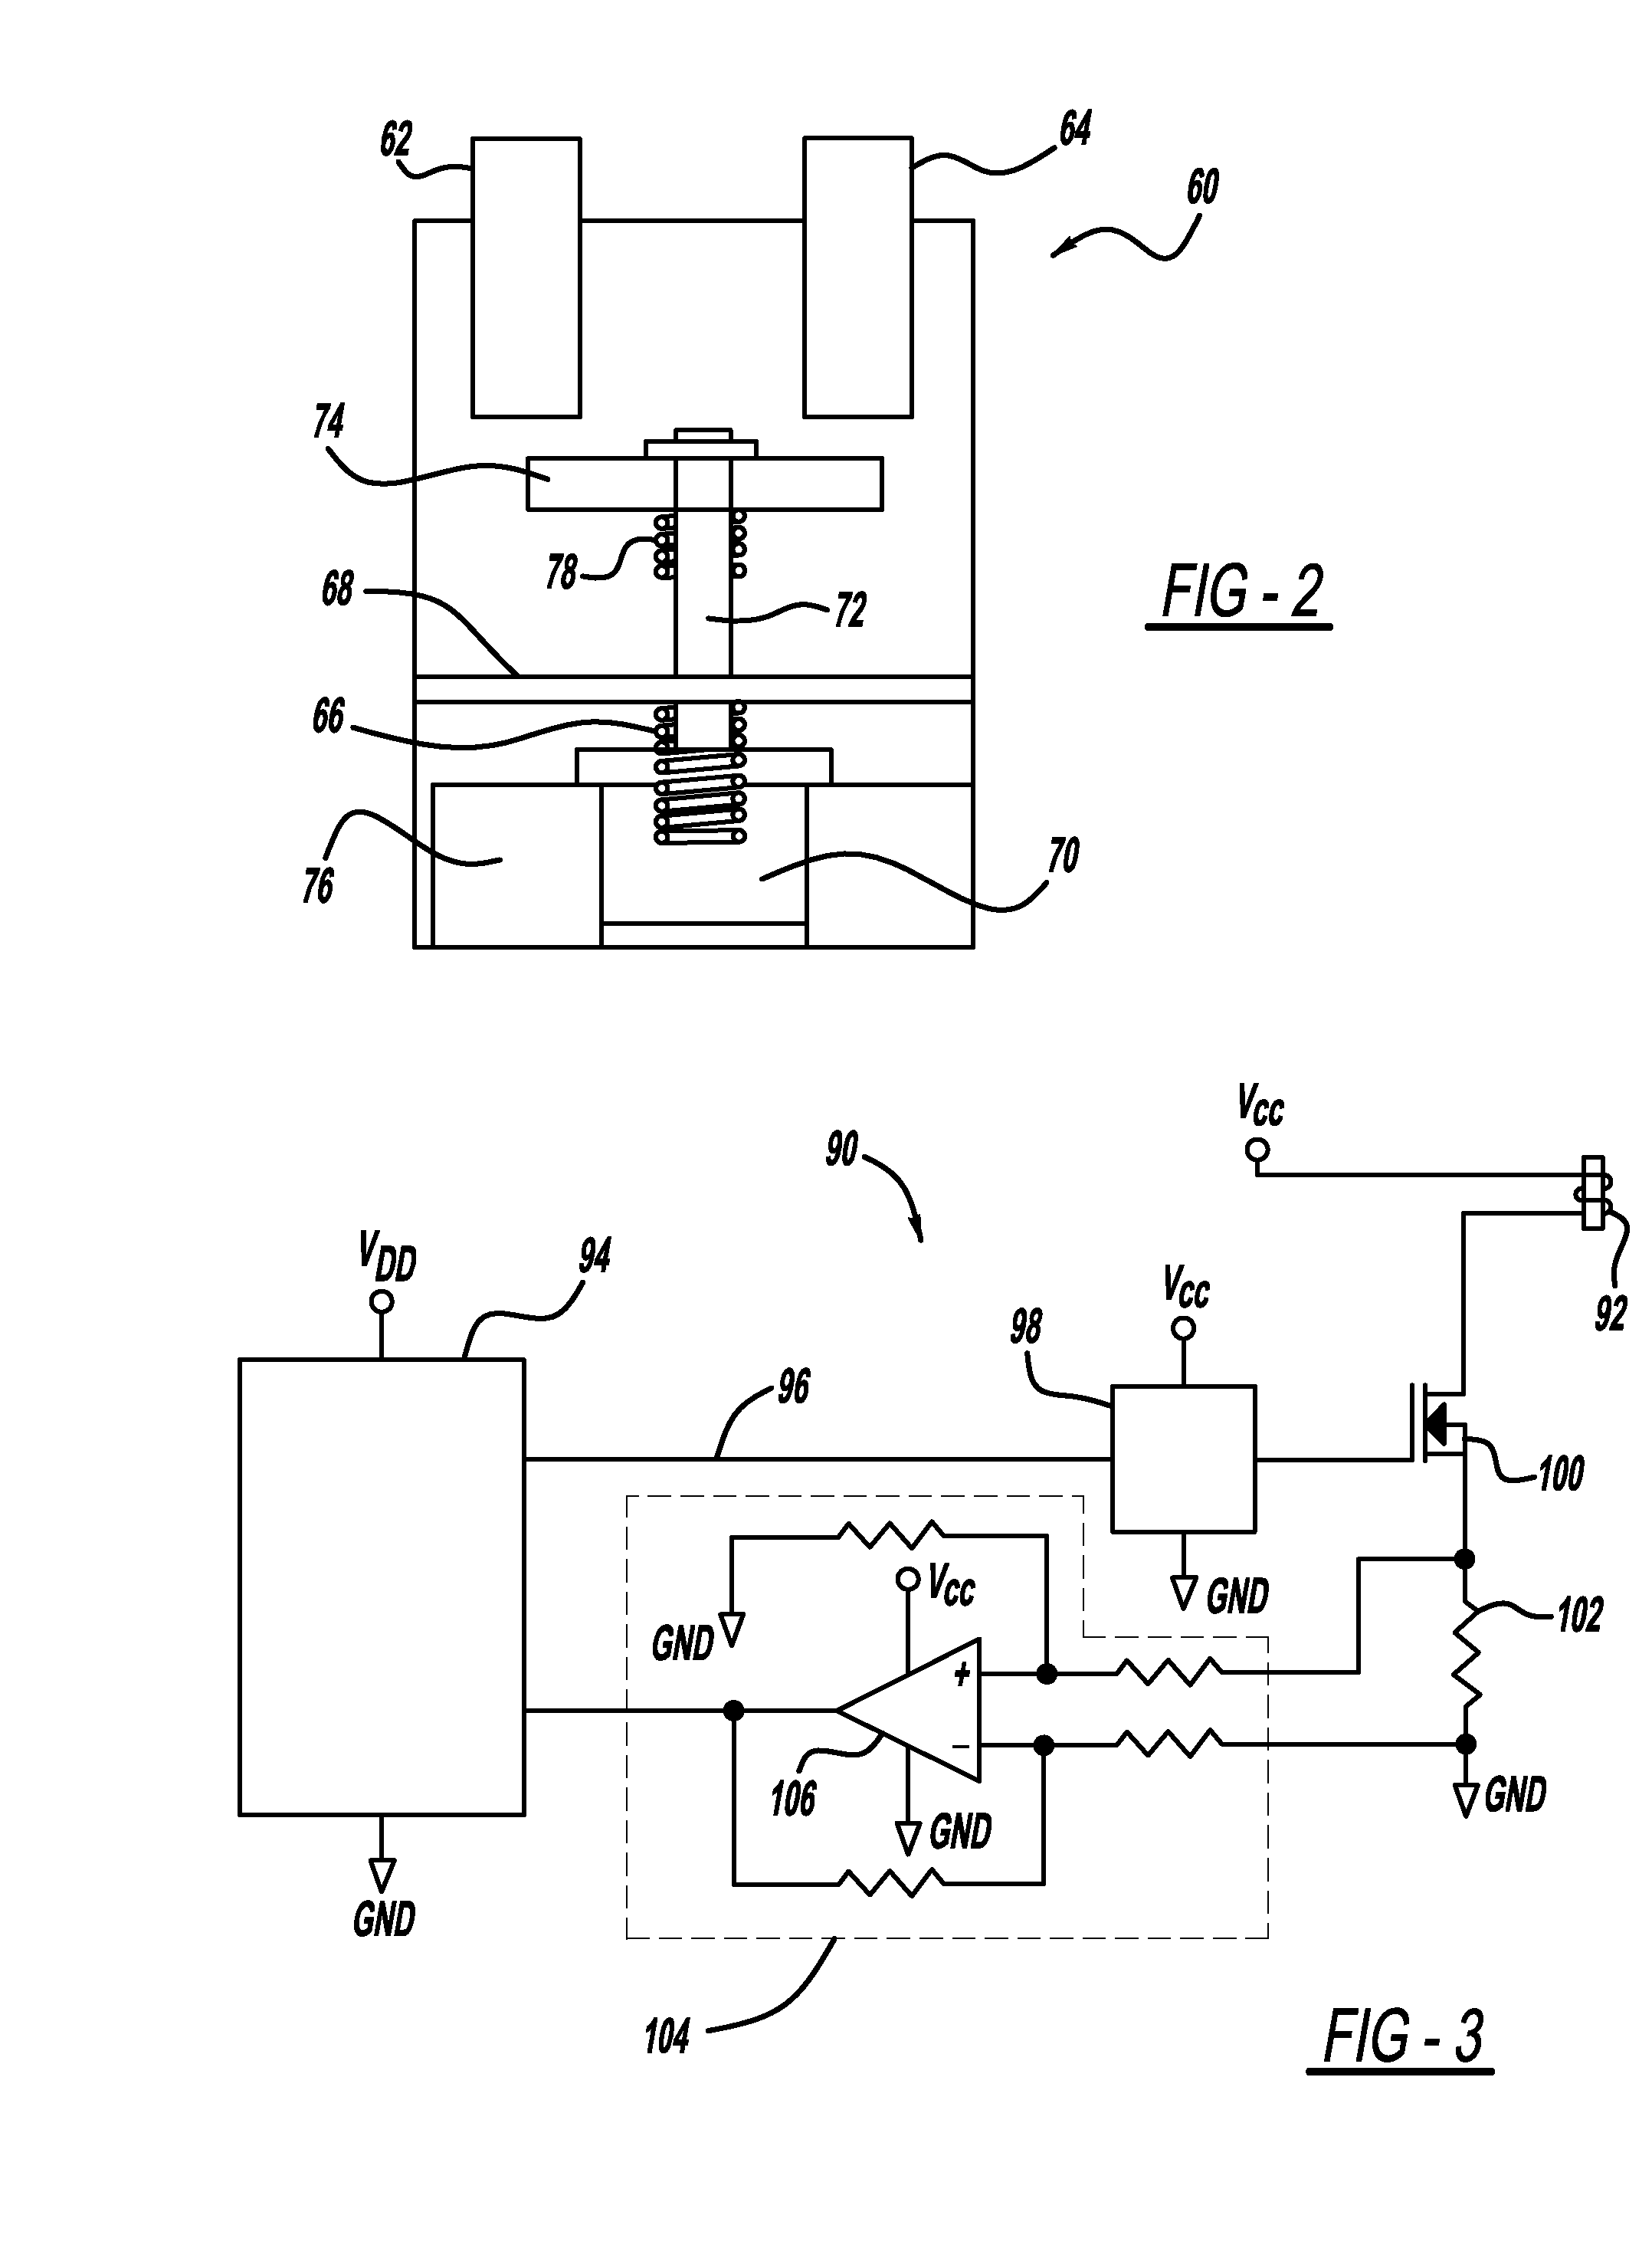 Diagnosis of hev/ev battery disconnect system